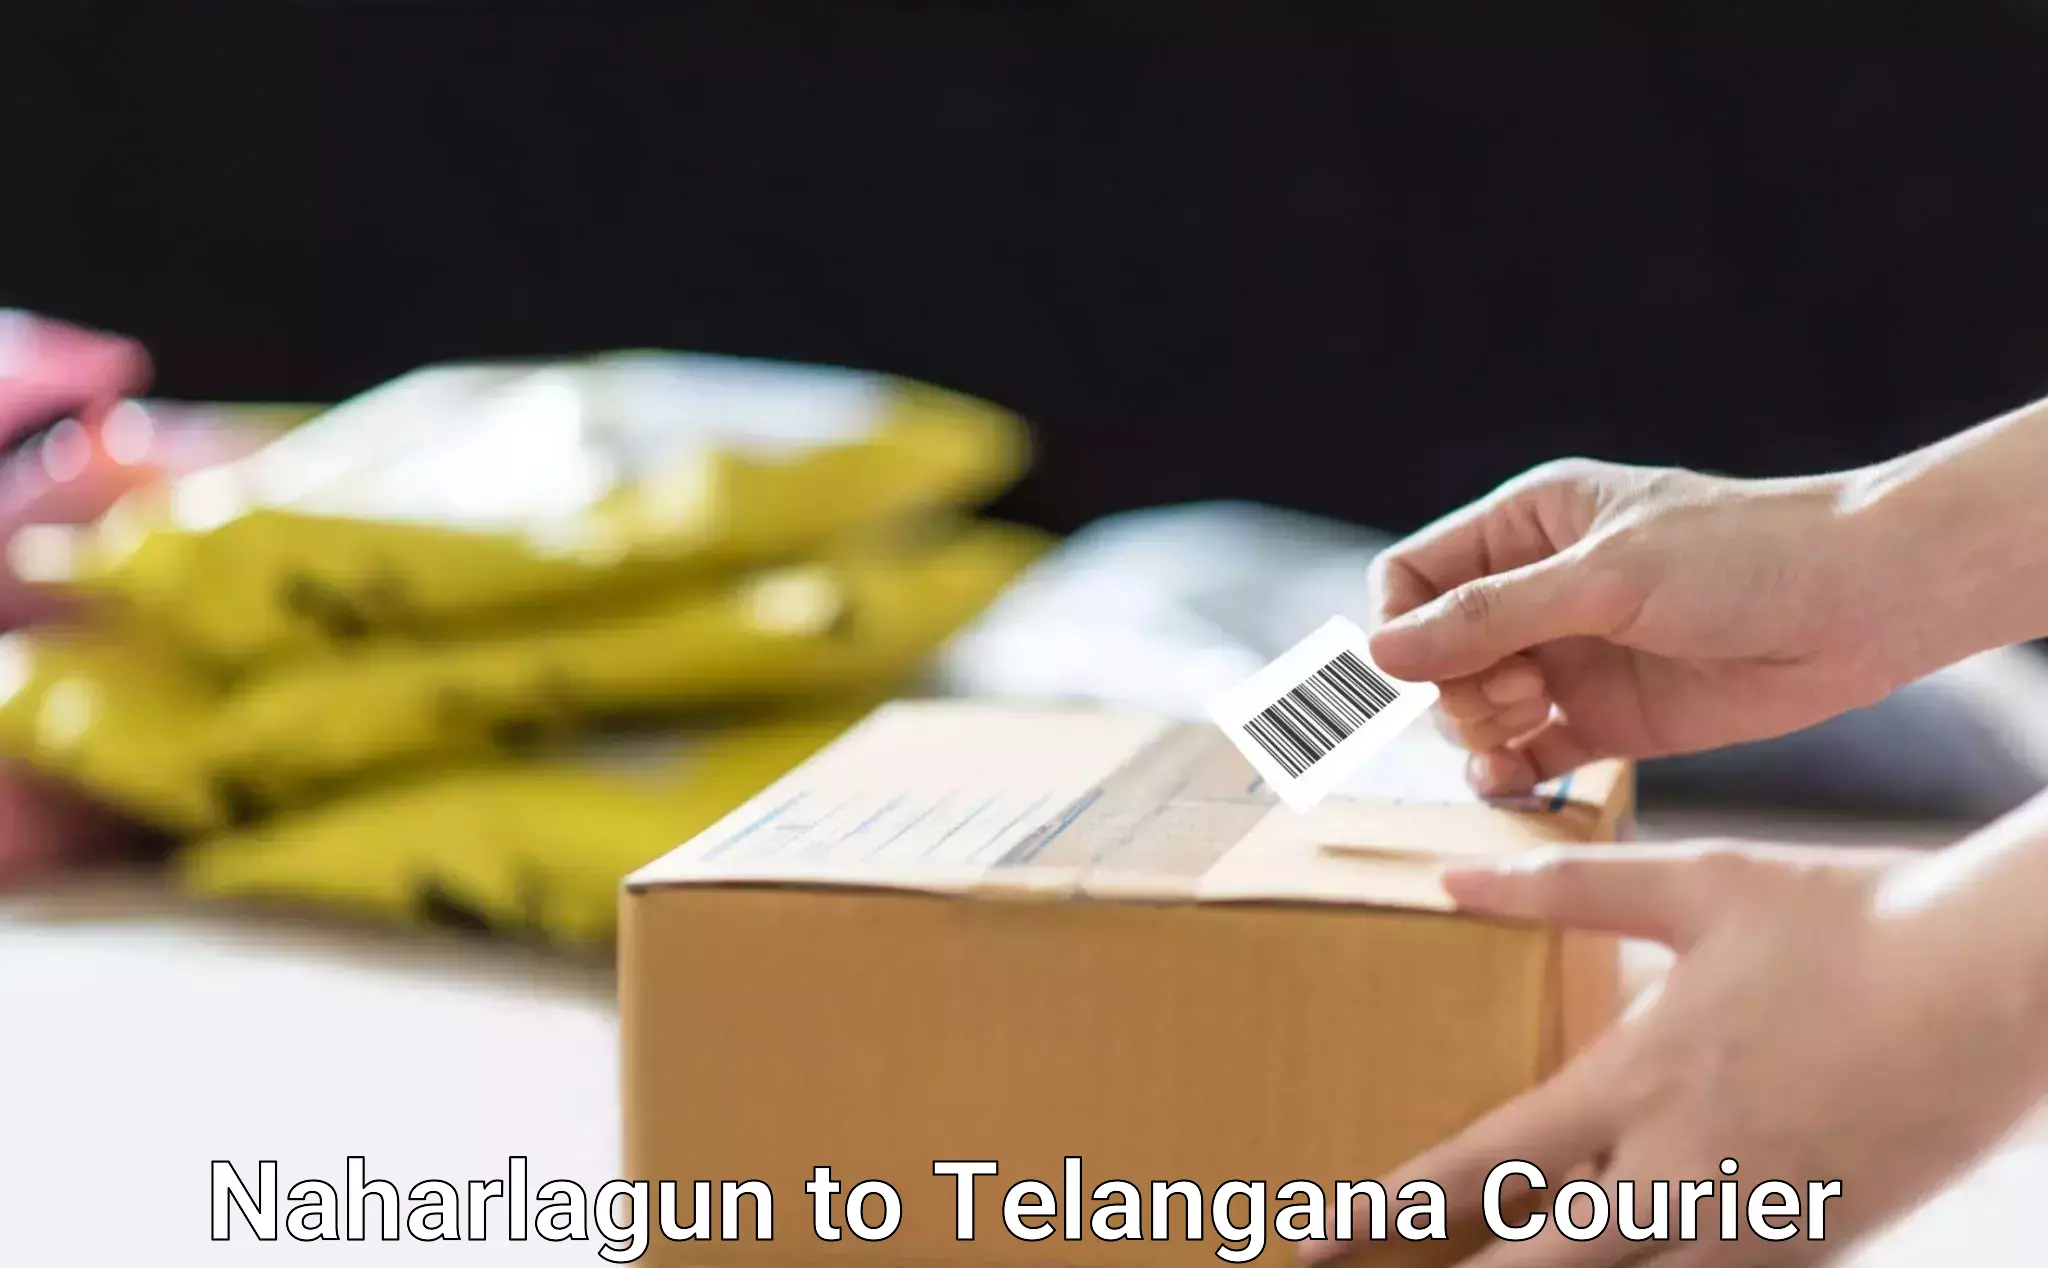 Package delivery network Naharlagun to Secunderabad